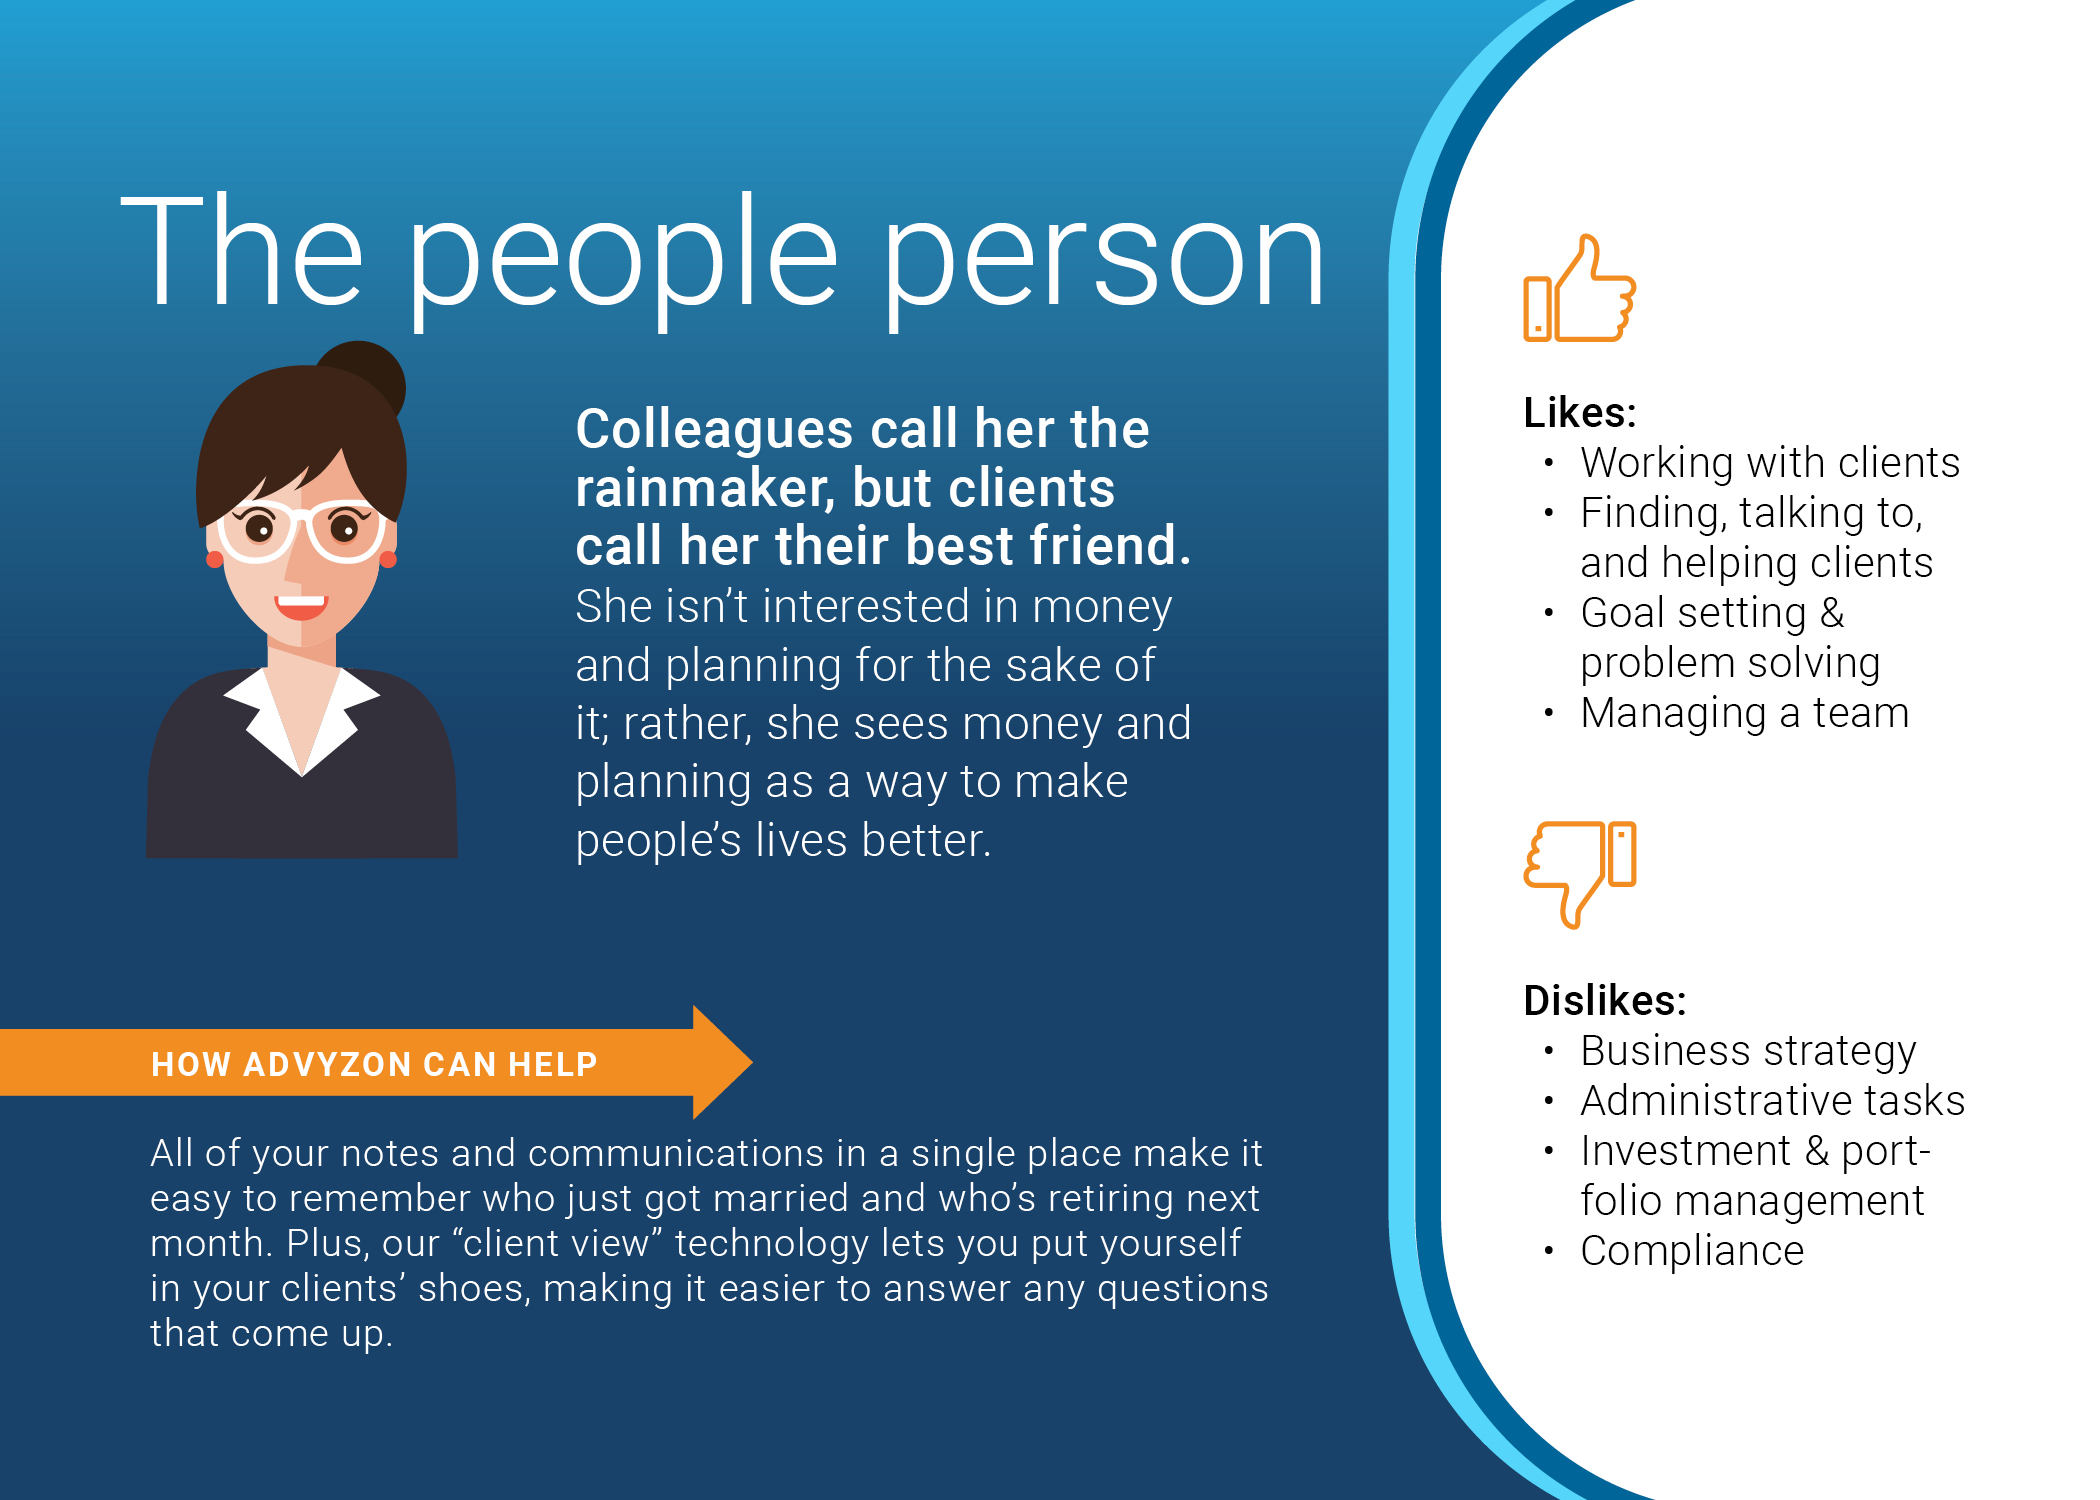 The people person
Colleagues call her the rainmaker, but clients call her their best friend. She isn’t interested in money and planning for the sake of it; rather, she sees money and planning as a way to make people’s lives better.  
Likes:
    • Working with clients
    • Finding, talking to, and helping clients
    • Goal setting & problem solving
    • Managing a team
Dislikes:
    • Business strategy
    • Administrative tasks
    • Investment & portfolio management
    • Compliance
How Advyzon can help
All of your notes and communications in a single place make it easy to remember who just got married and who’s retiring next month. Plus, our “client view” technology lets you put yourself in your clients’ shoes, making it easier to answer any questions that come up.